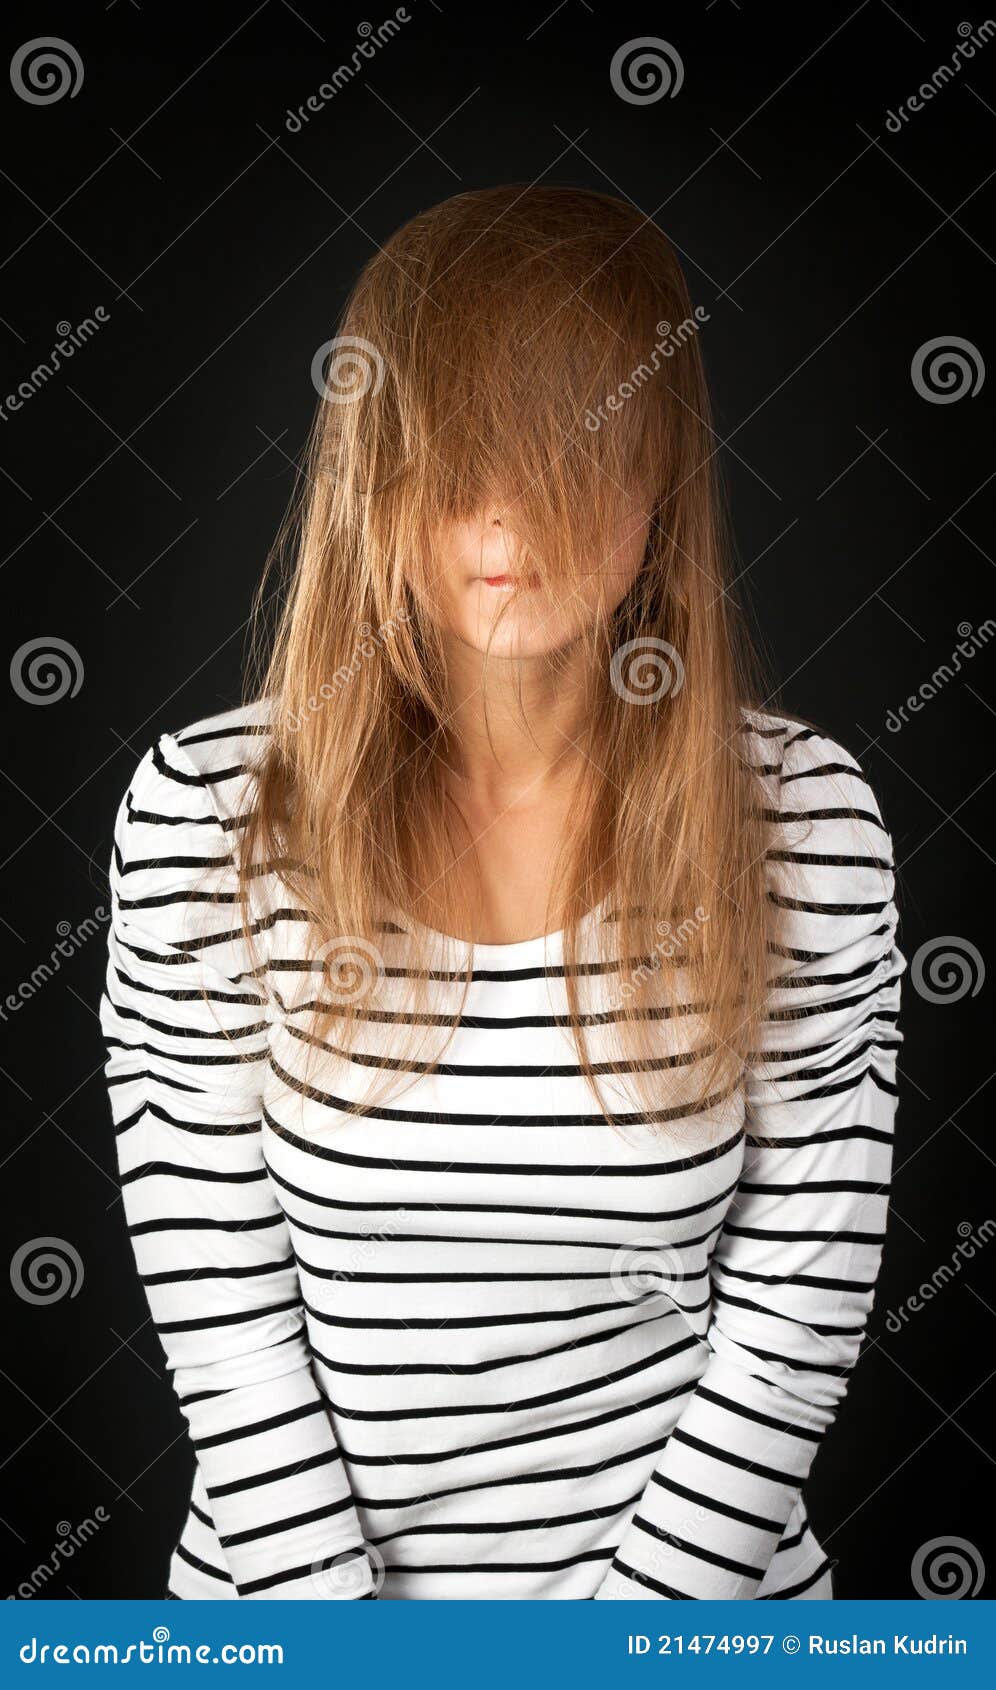  Hair  Covers  Her Face  With A Young Girl Stock Image Image 